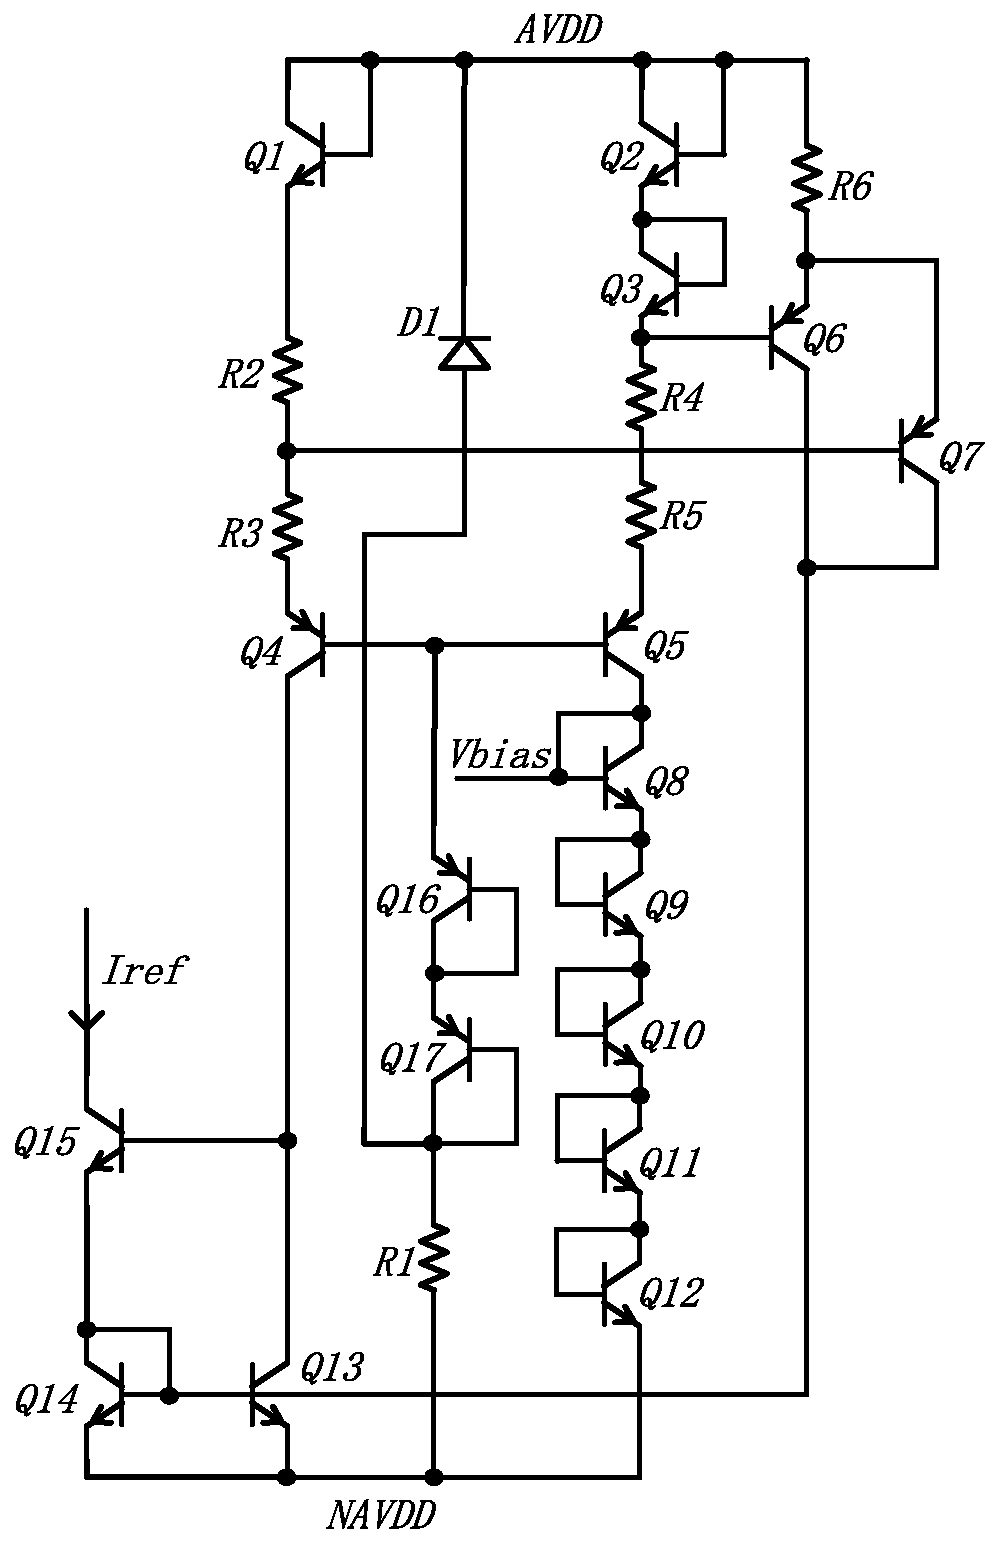 Bandgap reference starting circuit and method for wide power supply range based on radiation-resistant bipolar technology